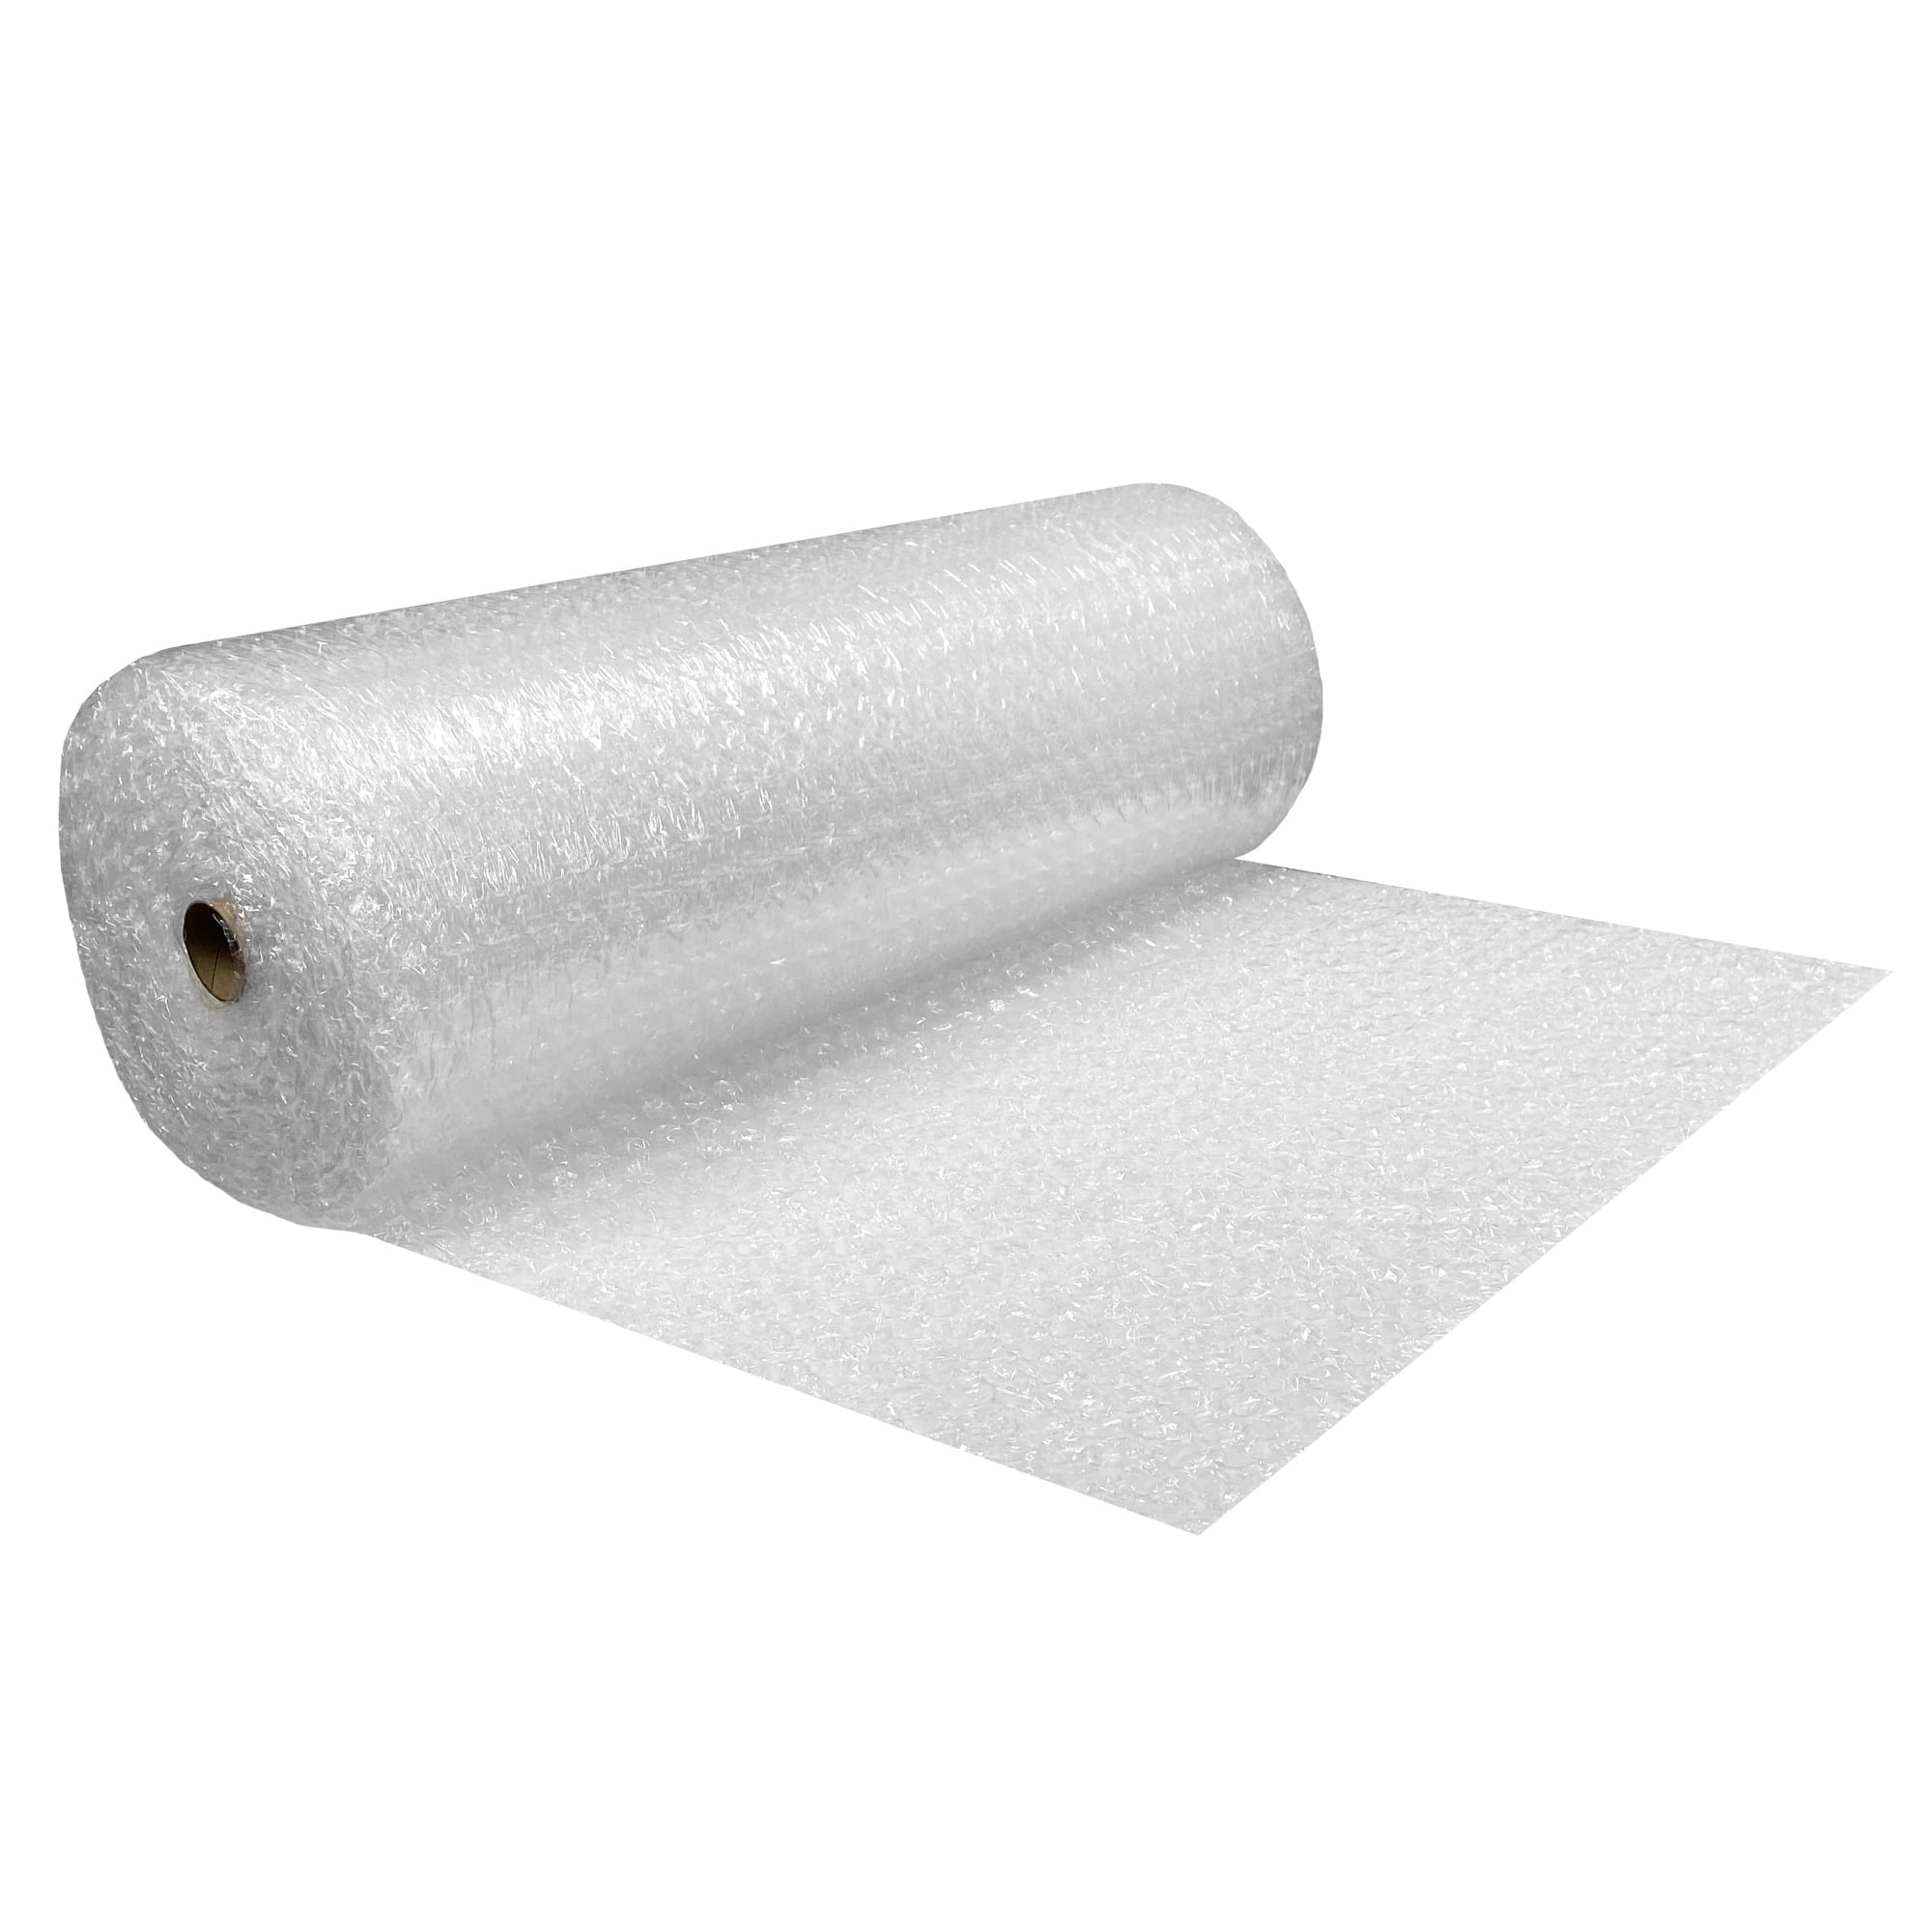 UBMOVE Bubble Cushioning Wrap Roll - 48 Wide x 65 Ft - Large 1/2 Bubbles  